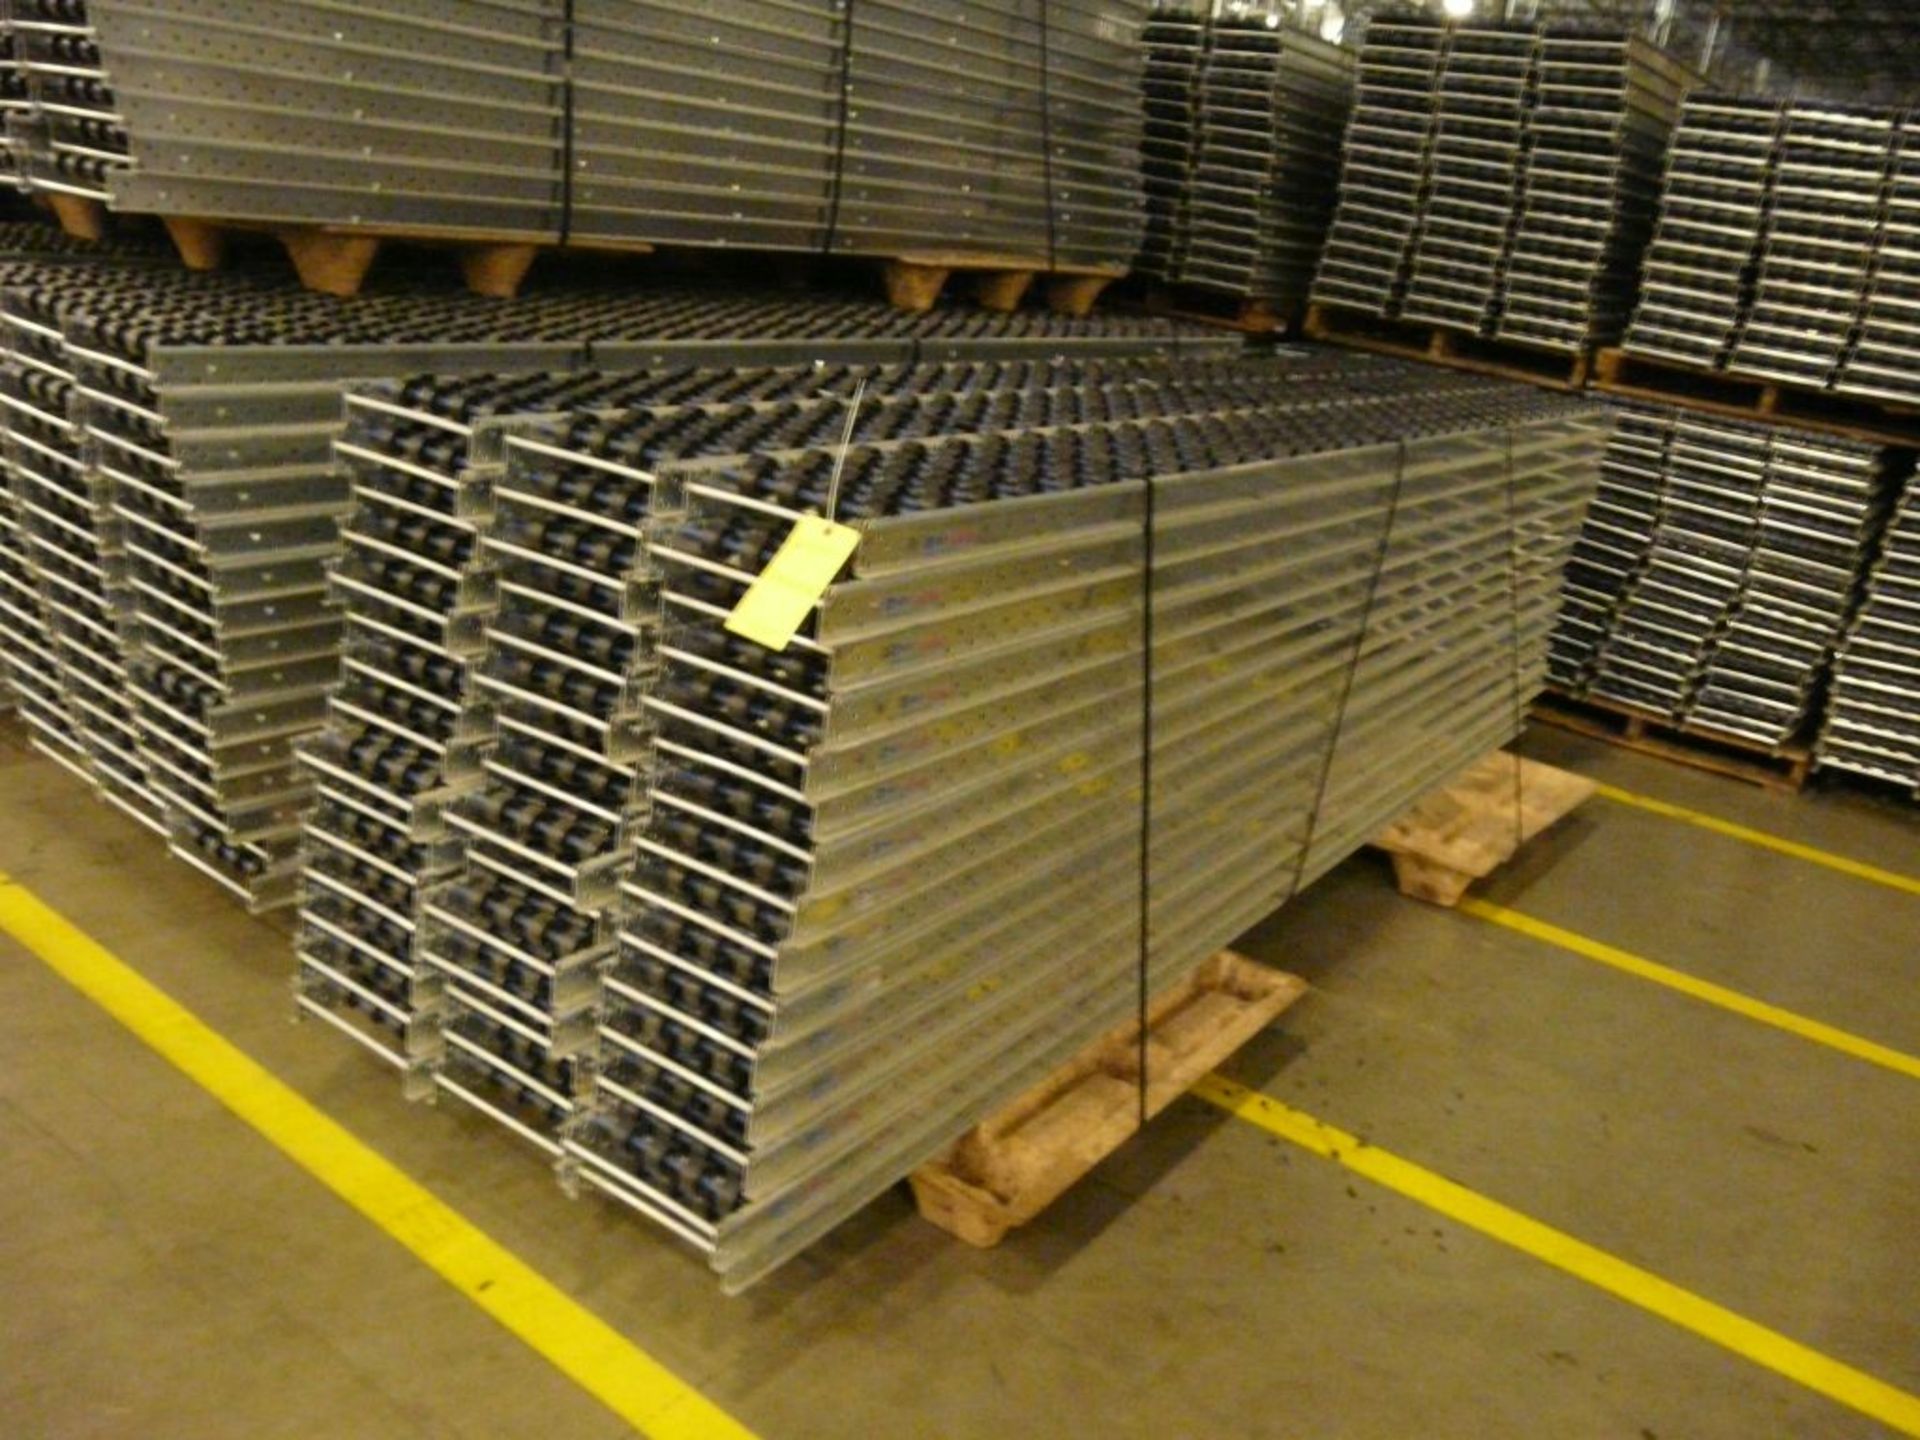 Lot of (90) SpanTrack Wheelbed Carton Flow Conveyors - 11.5'L x 11"W; Tag: 223614 - $30 Lot